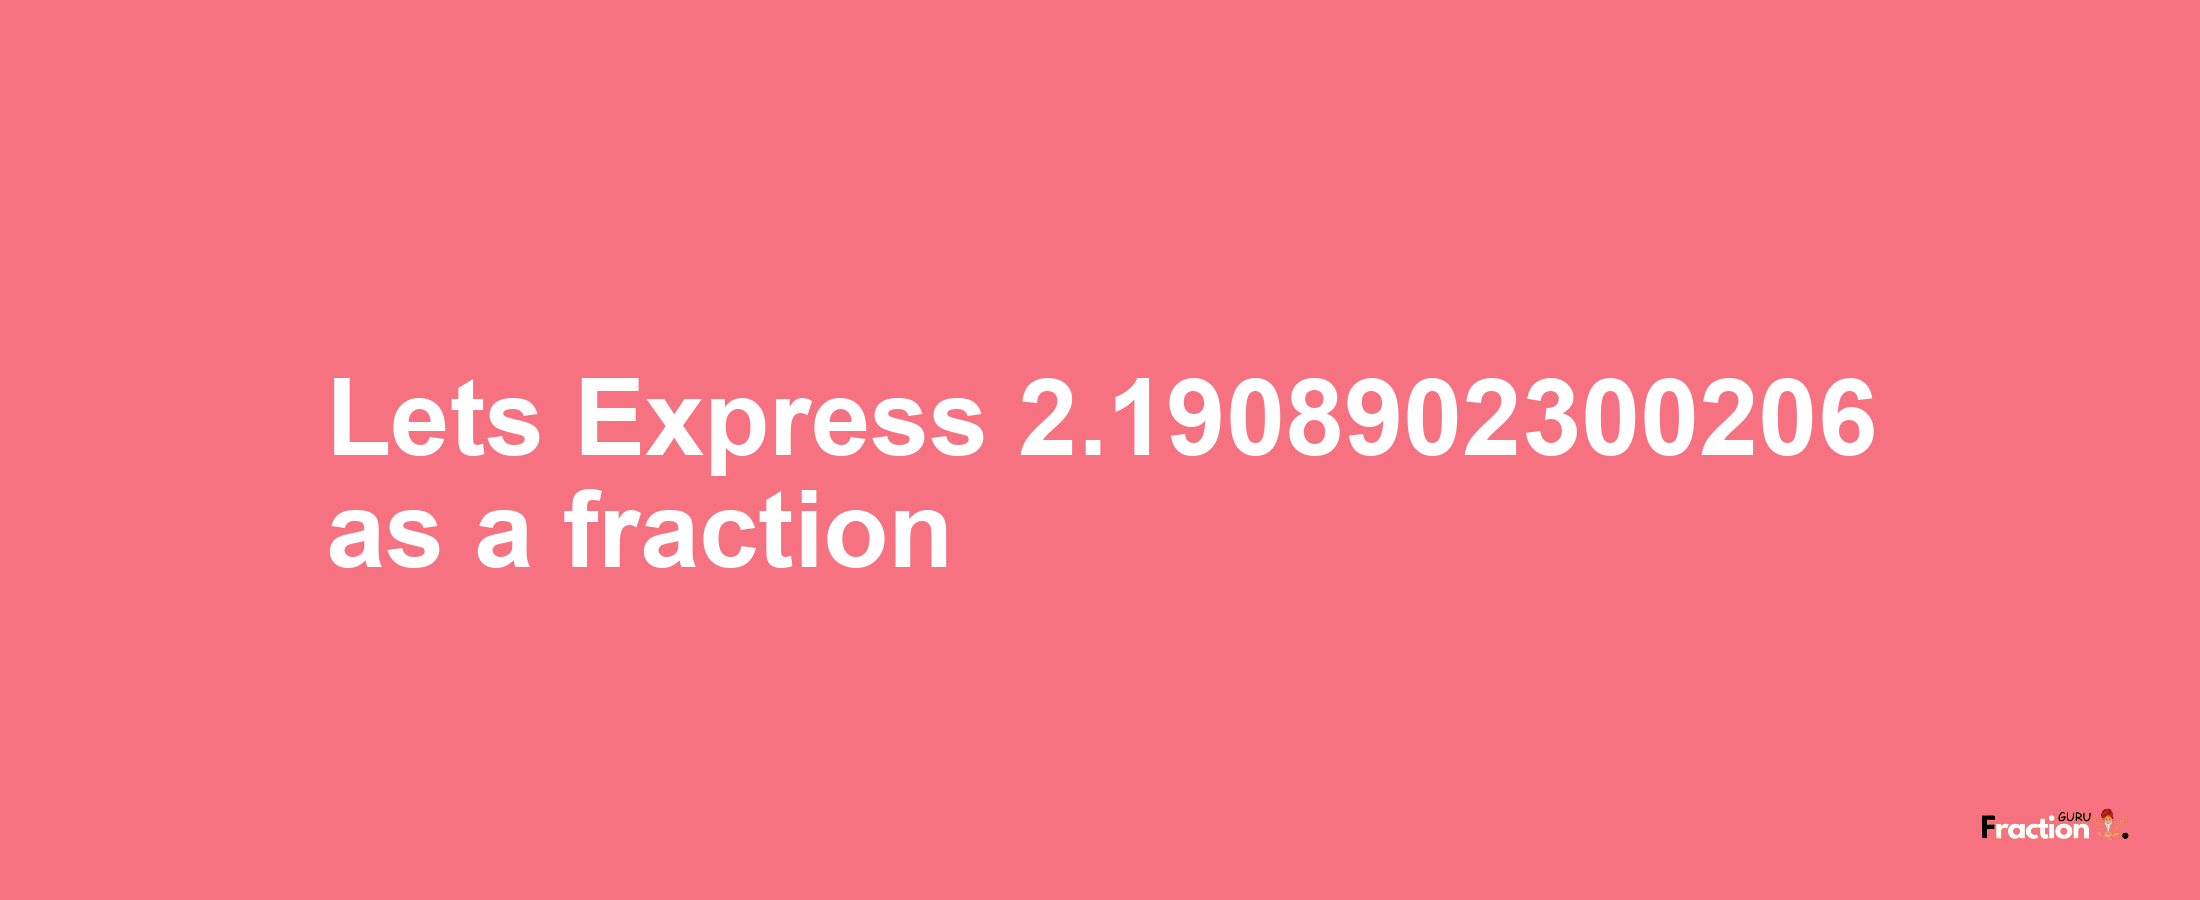 Lets Express 2.1908902300206 as afraction